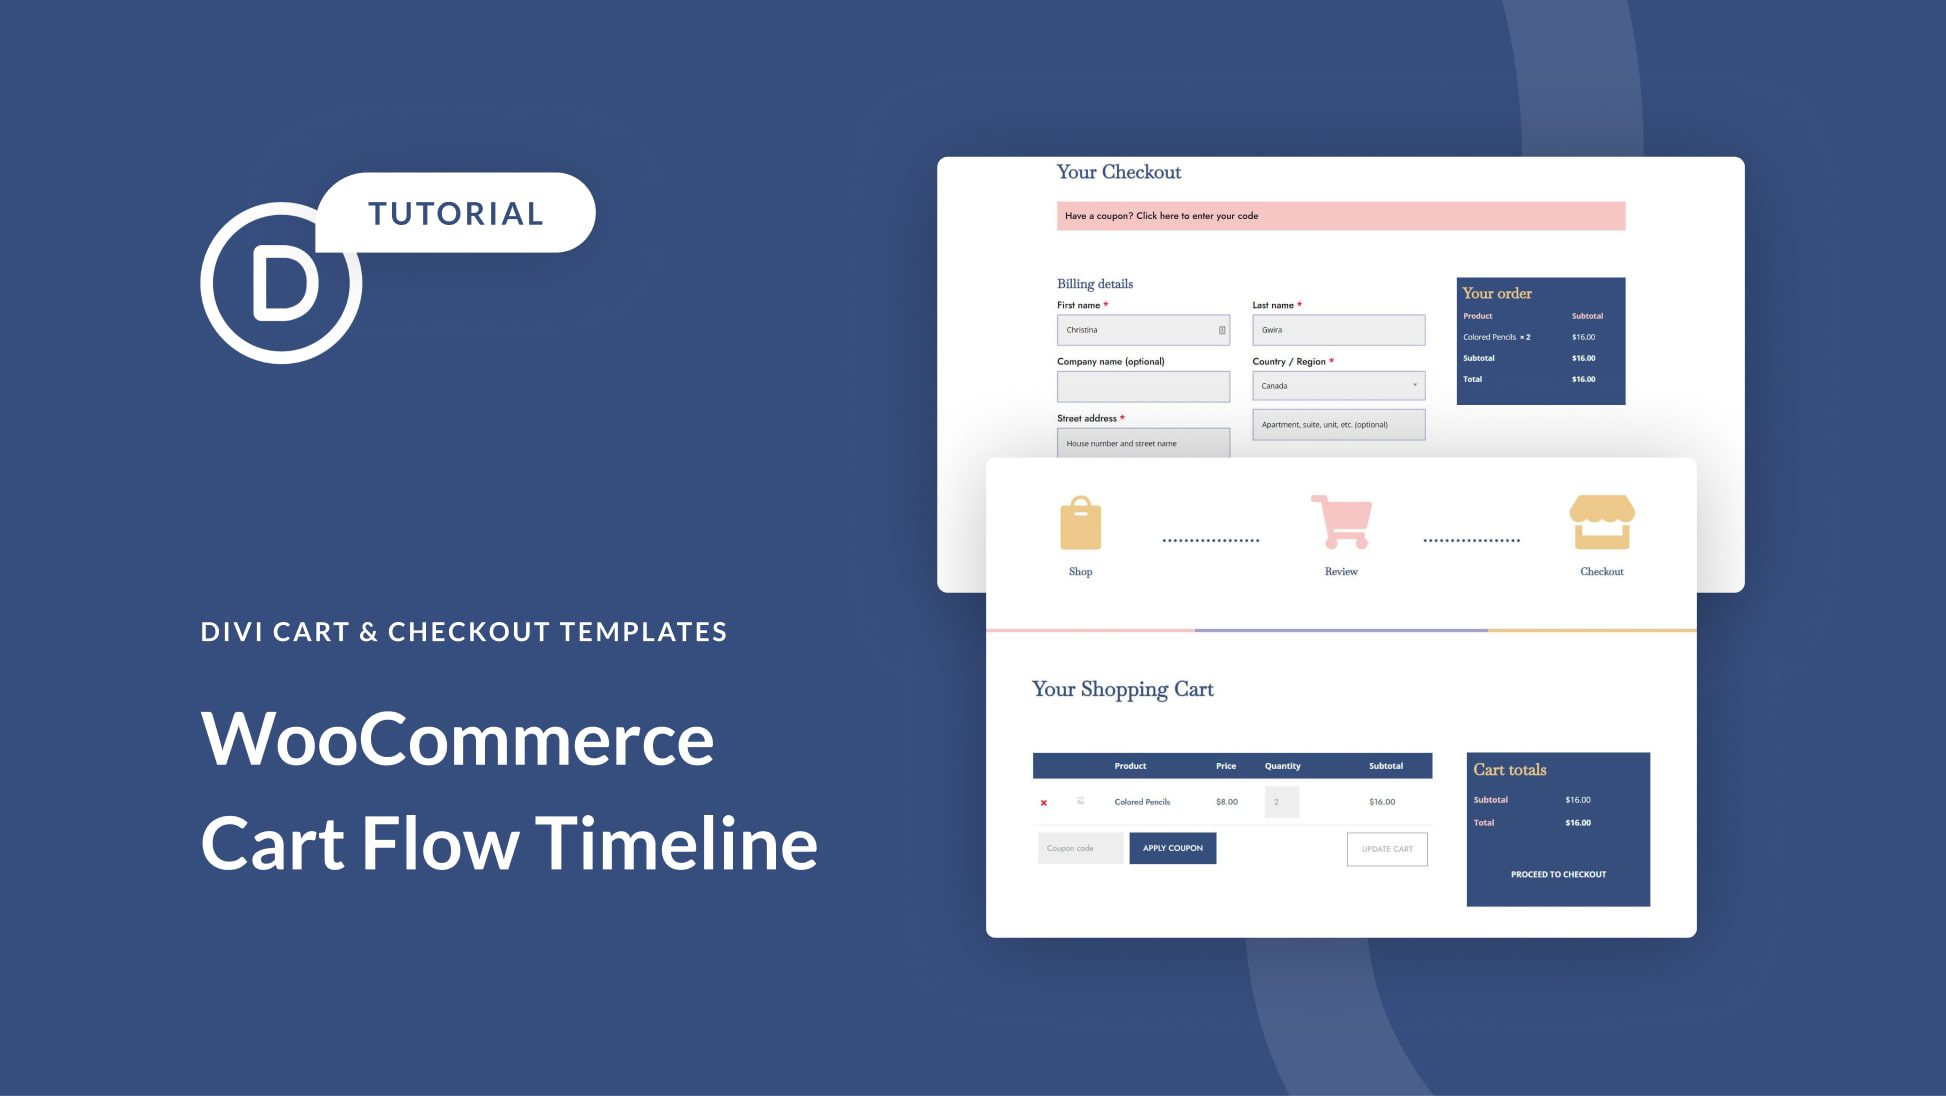 How to Design a WooCommerce Cart Flow Timeline for Your Divi Shop